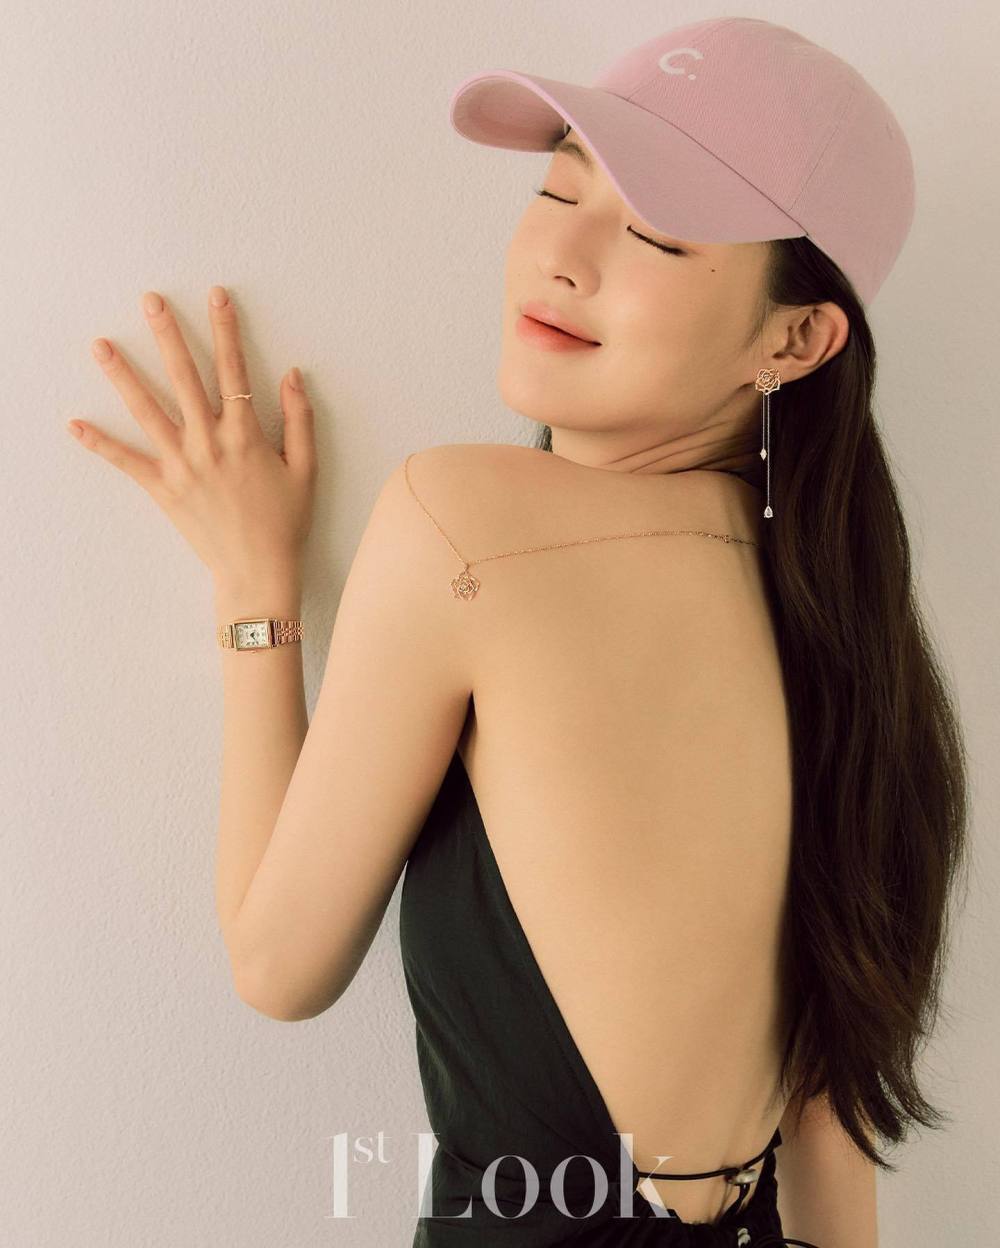 Sun-Bin Lee Sexy and Hottest Photos , Latest Pics